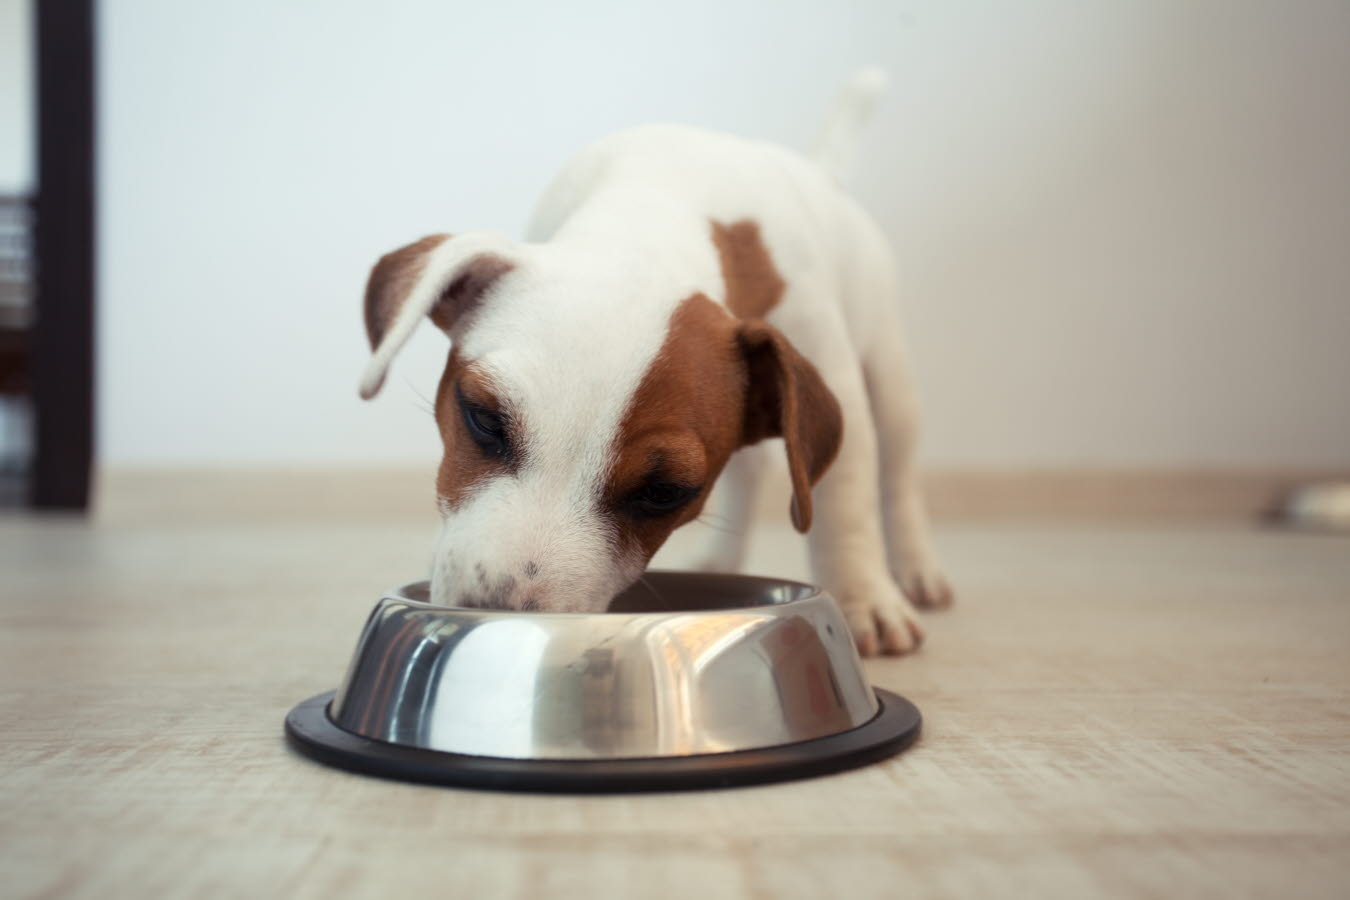 Jack Russell Puppy eating.jpg